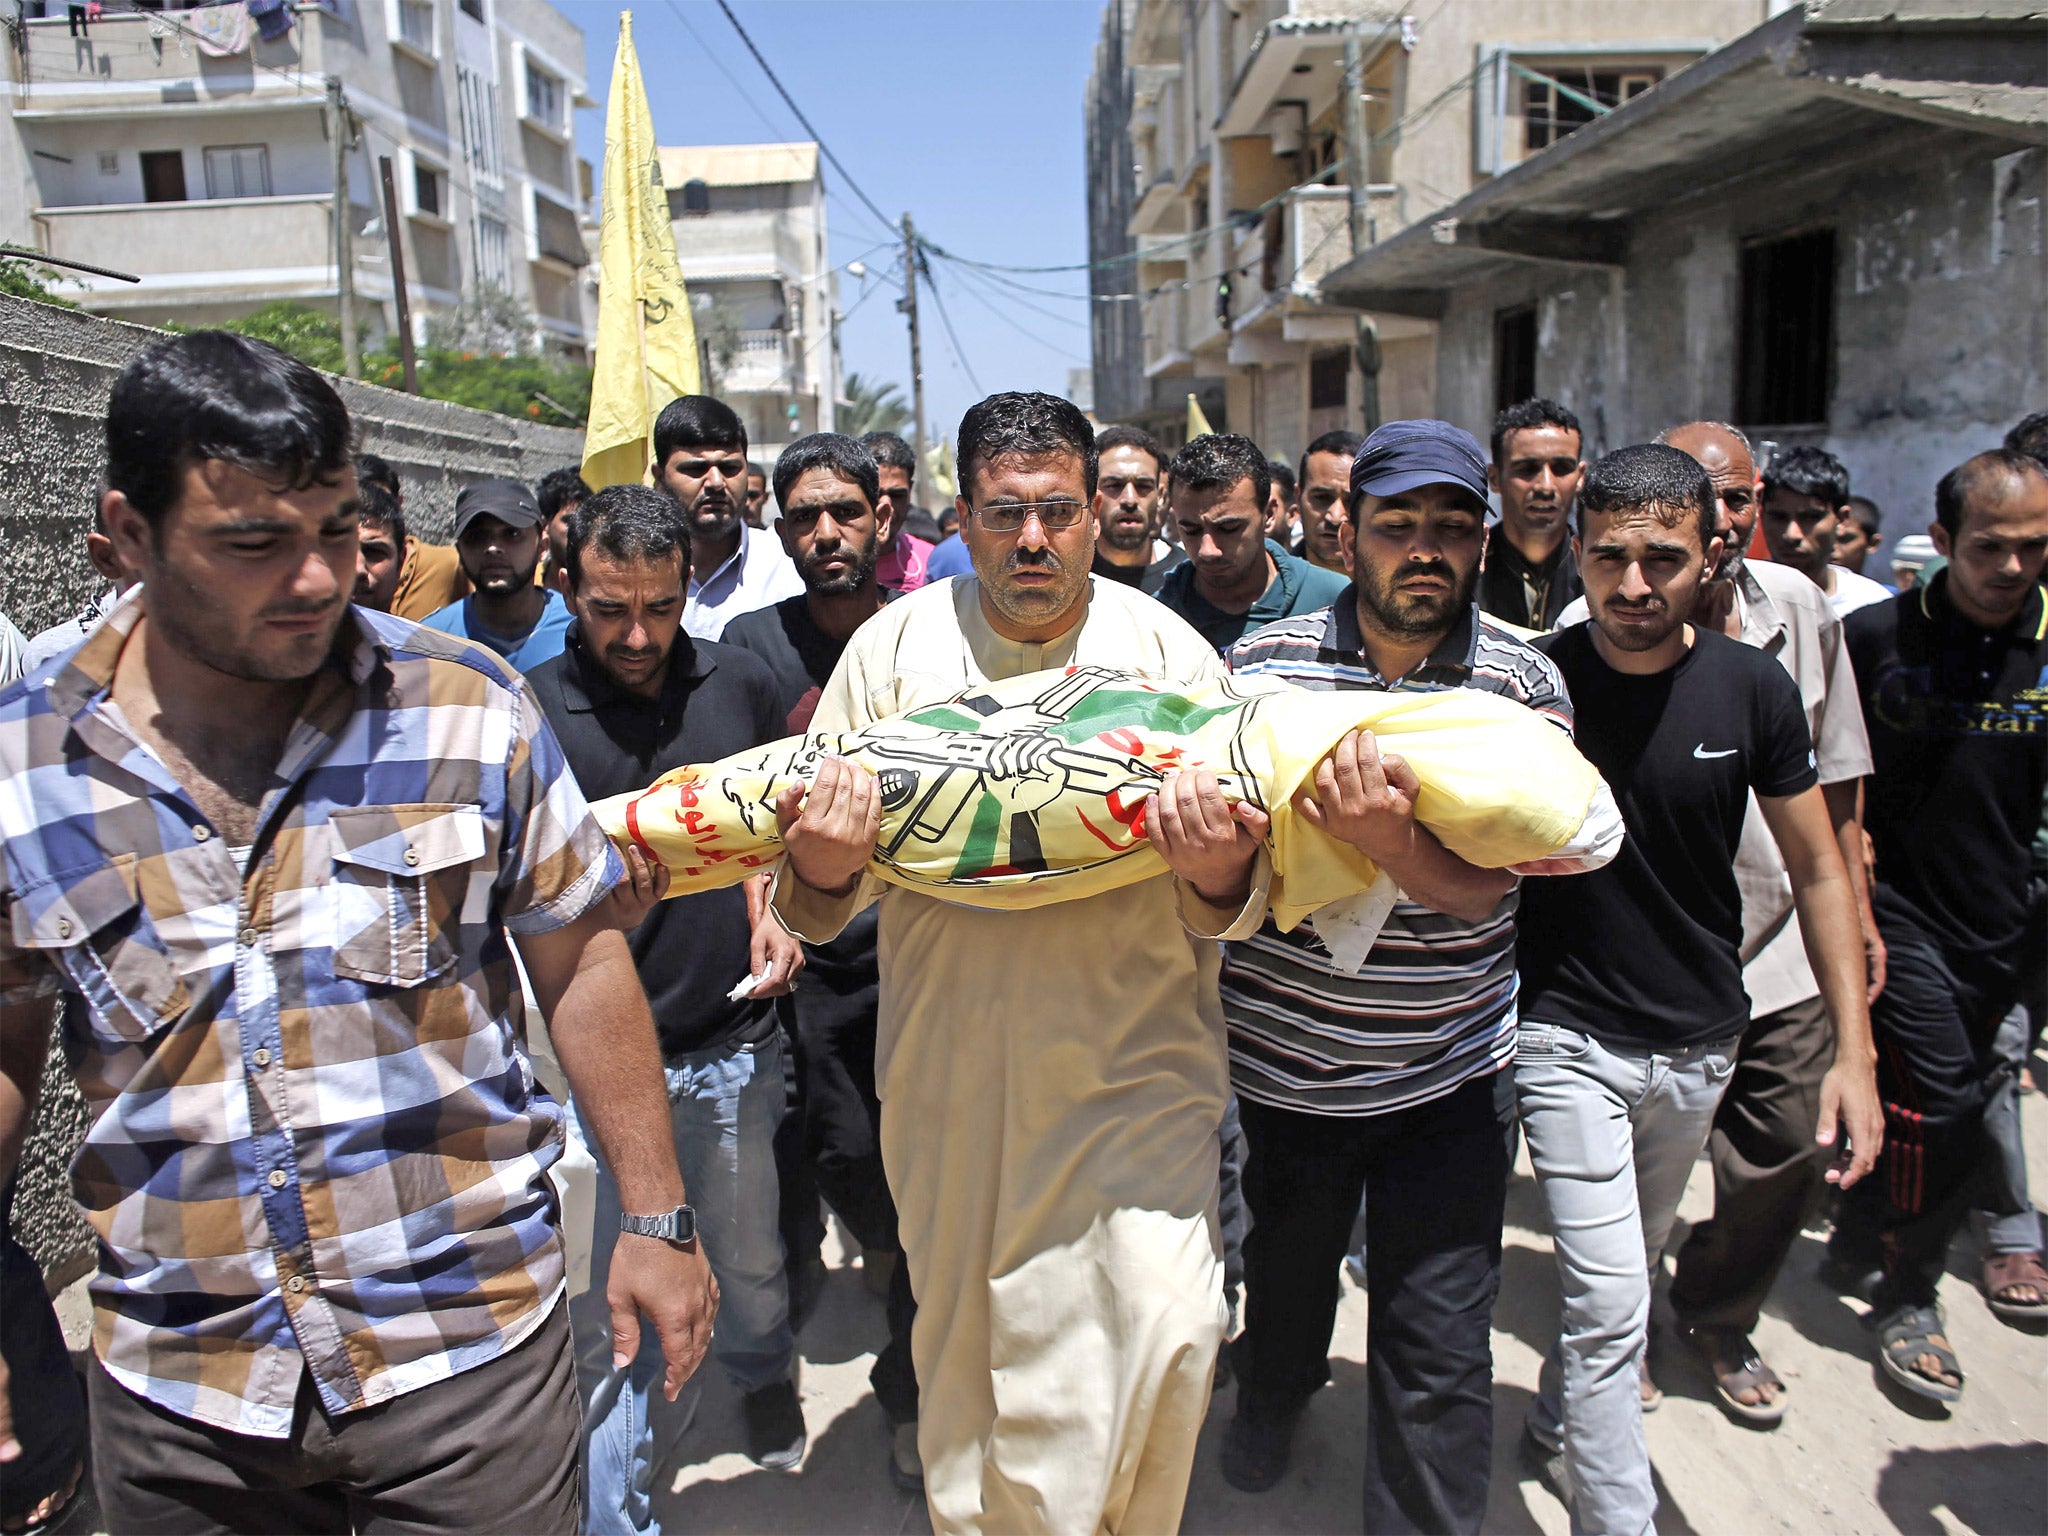 Relatives and friends of the al-Kaware family carry one of the seven members of the family to the mosque during their funeral in Khan Yunis. The father and his six sons were all killed in an Israeli air strike